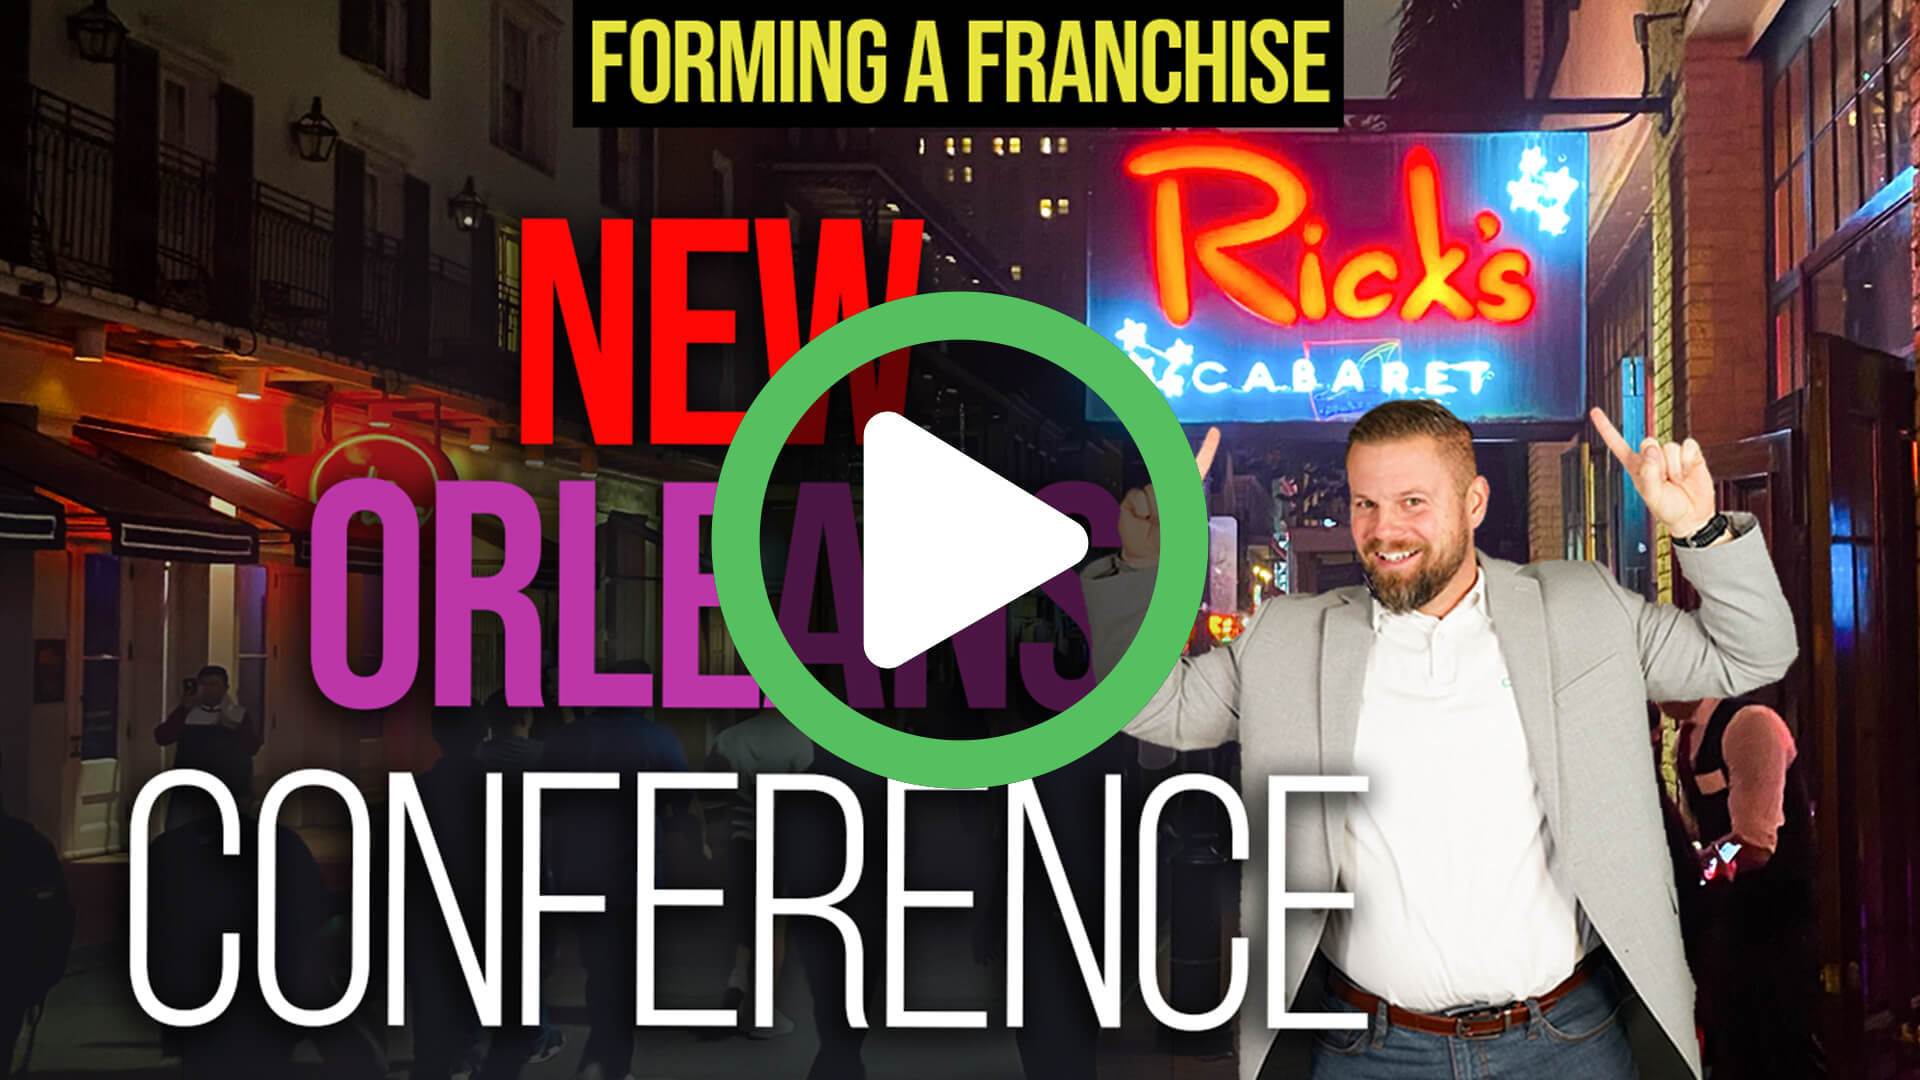 S3 EP9: Great Franchise Conference | IFA New Orleans